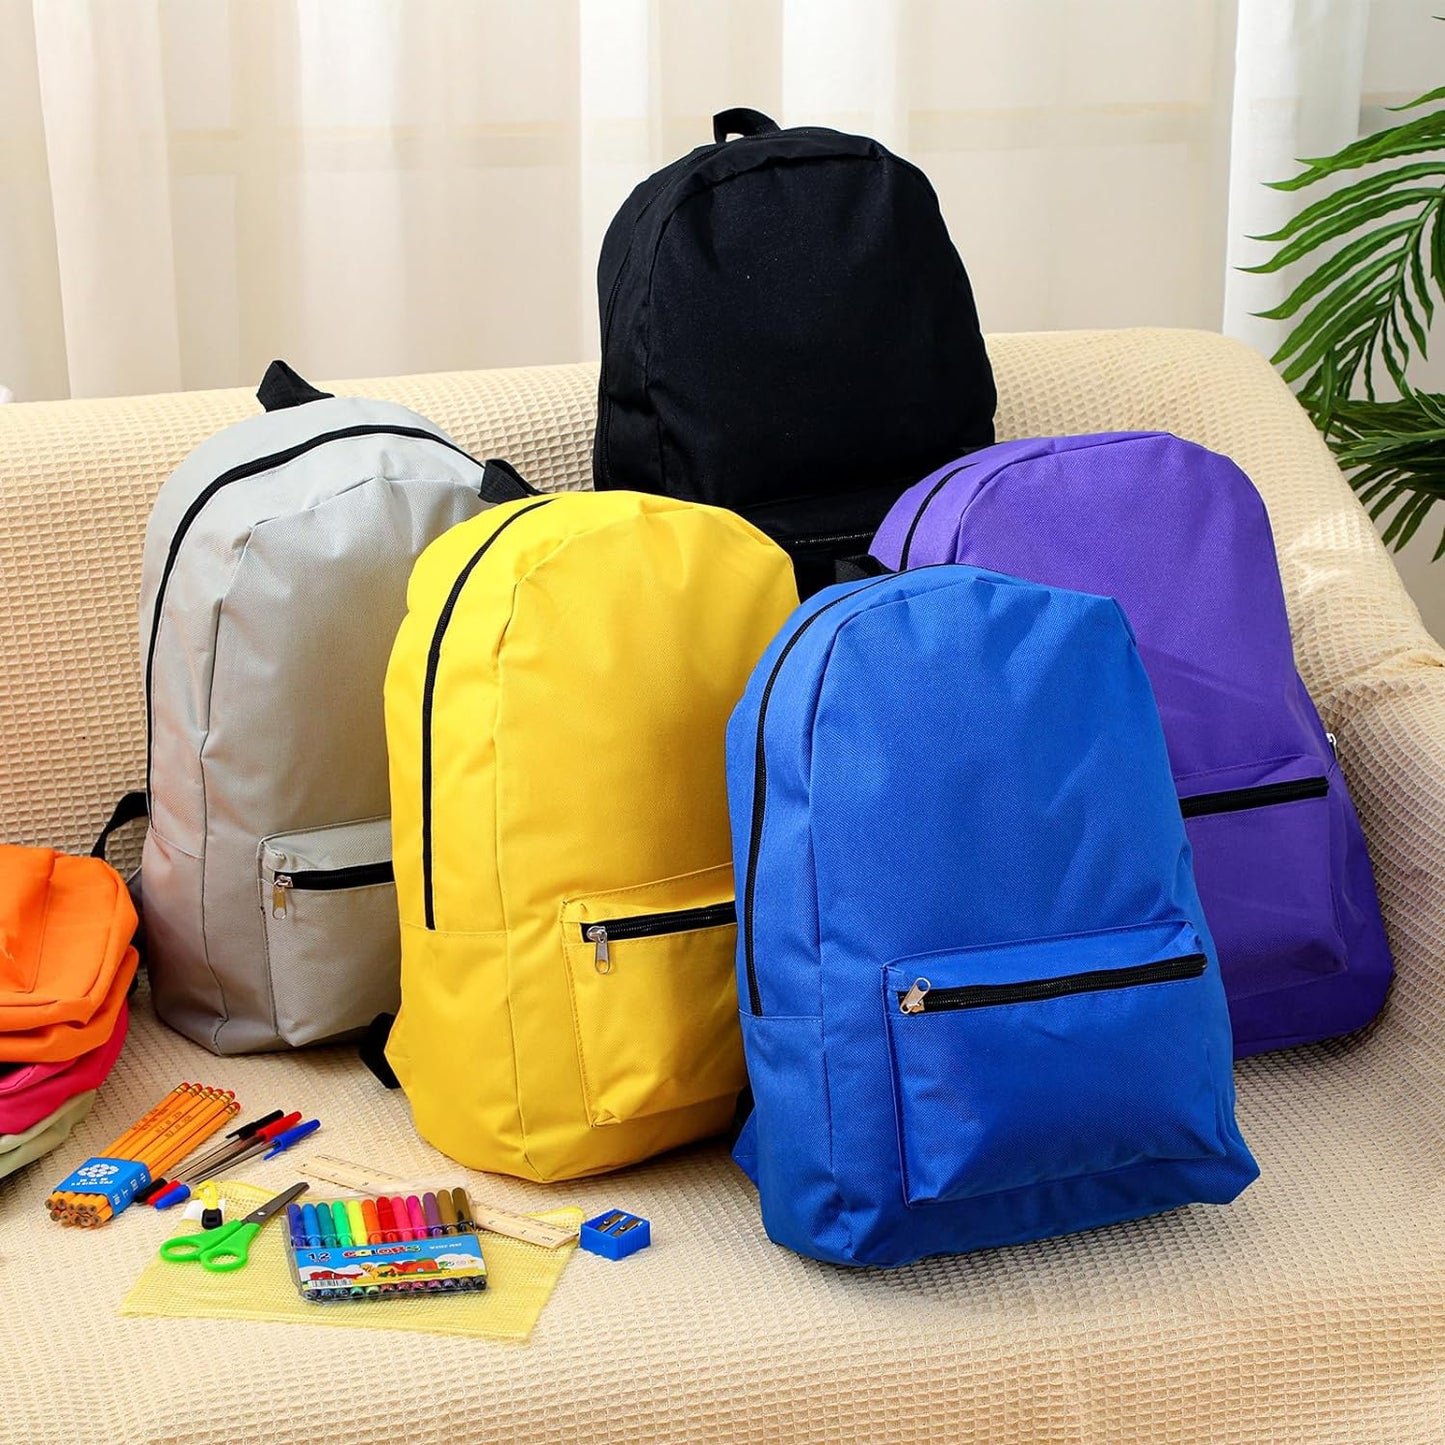 24 Pcs Backpack Bulk 17'' Book Bags and 24 Sets School Supplies Stationery Kit Back to School Stuff for Kids (Multicolor)